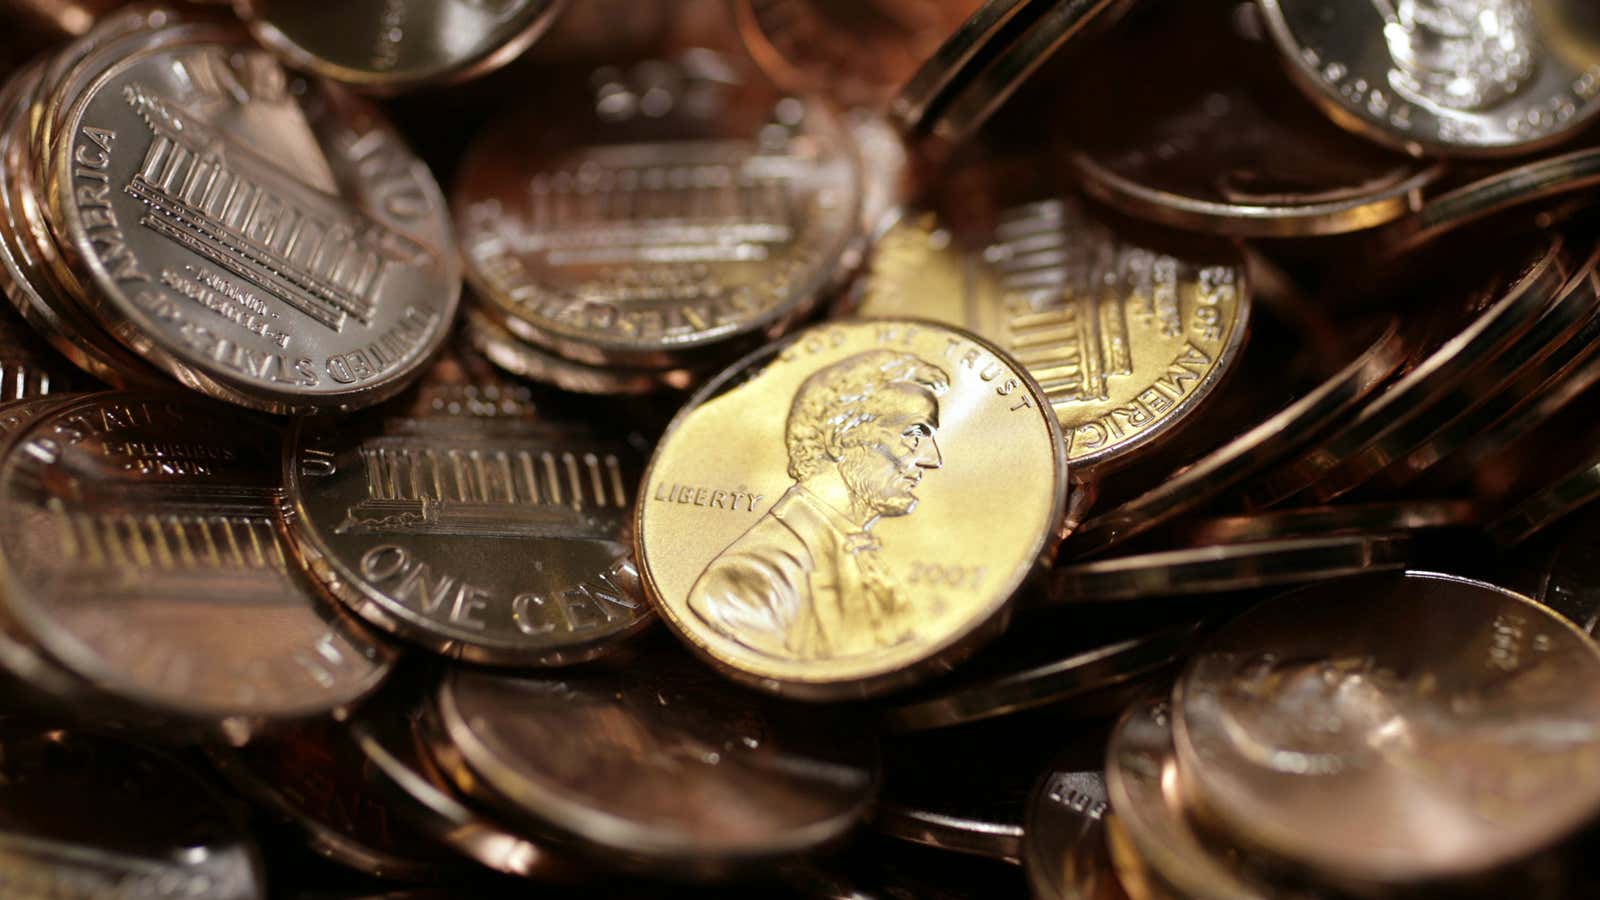 Other countries have already started to eliminate their low-value coins.